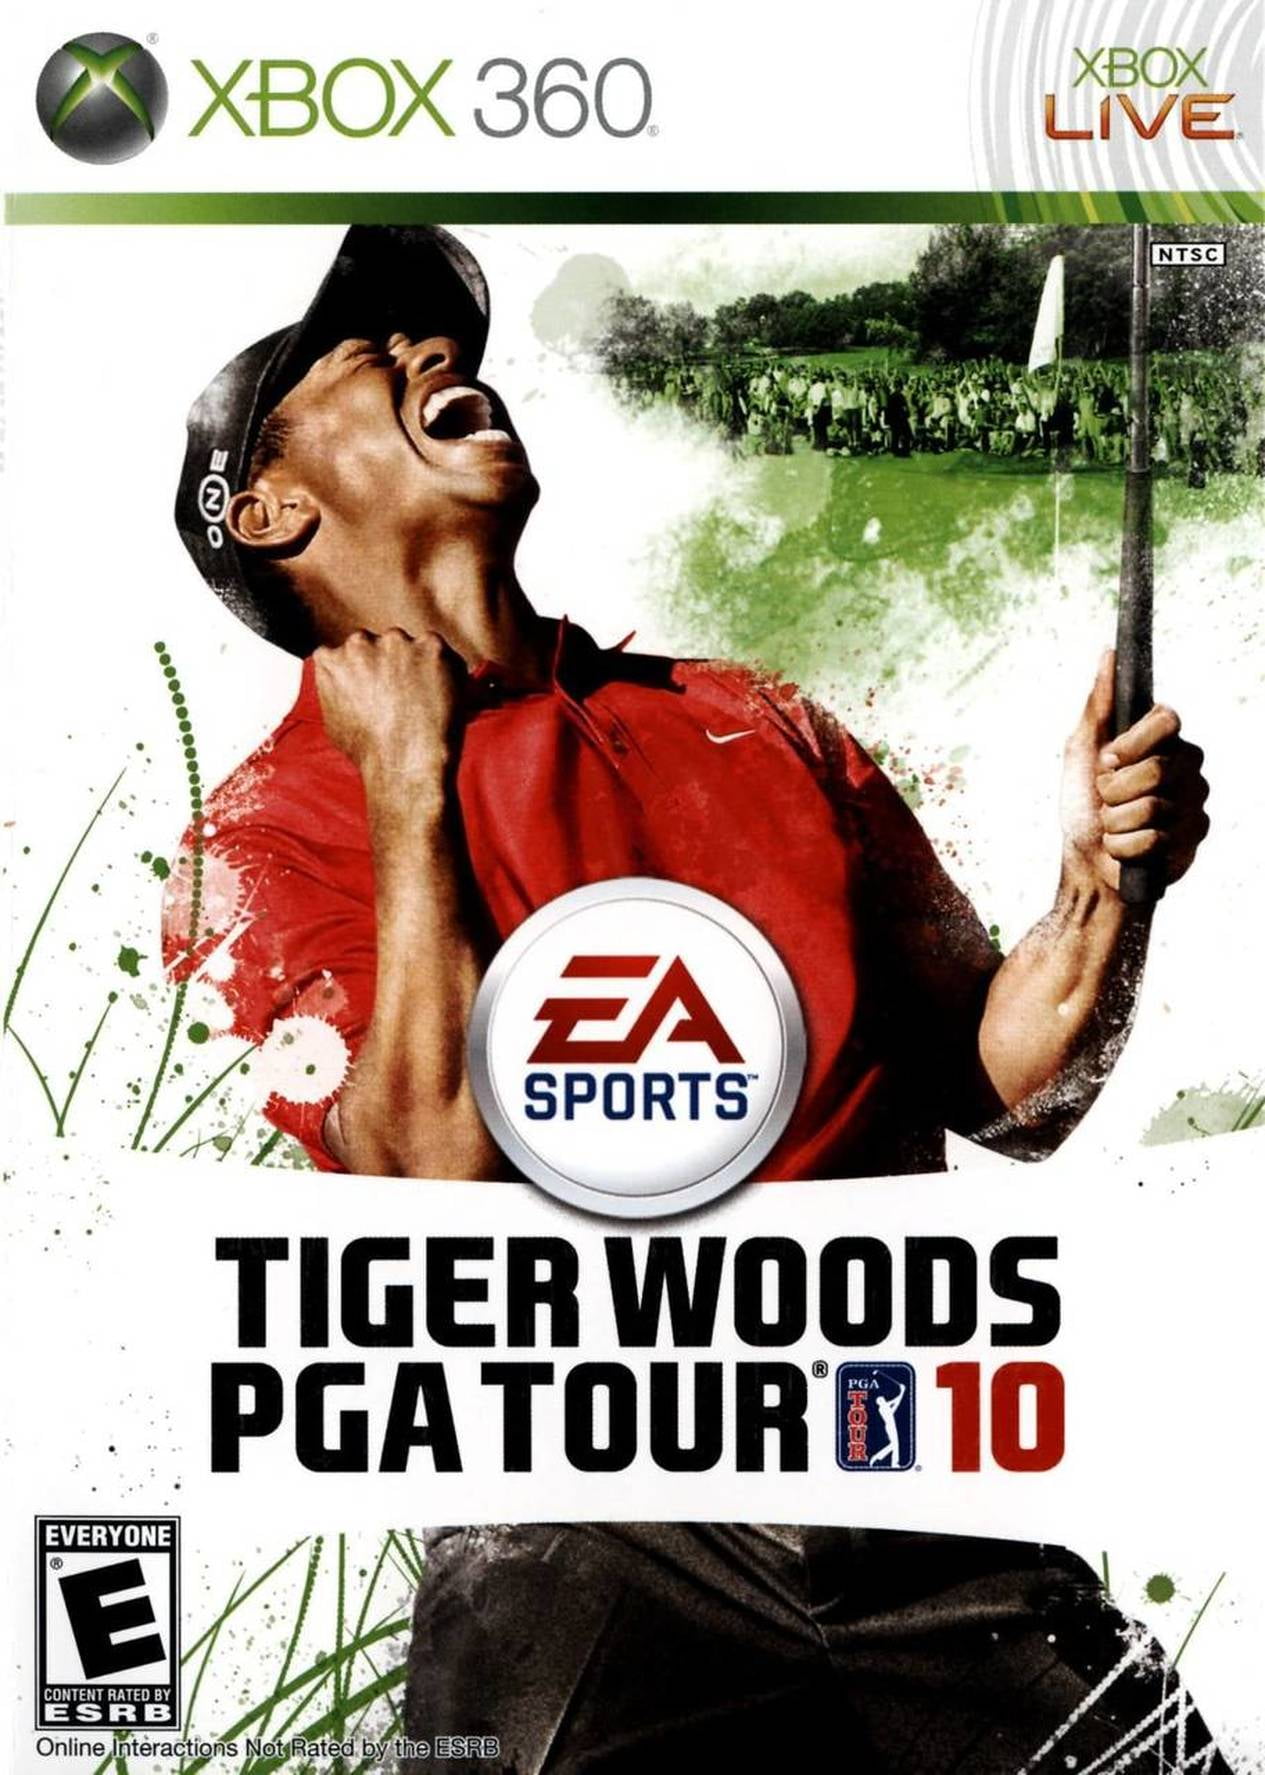 Tiger Woods PGA Tour 10 (Xbox 360) - Pre-Owned